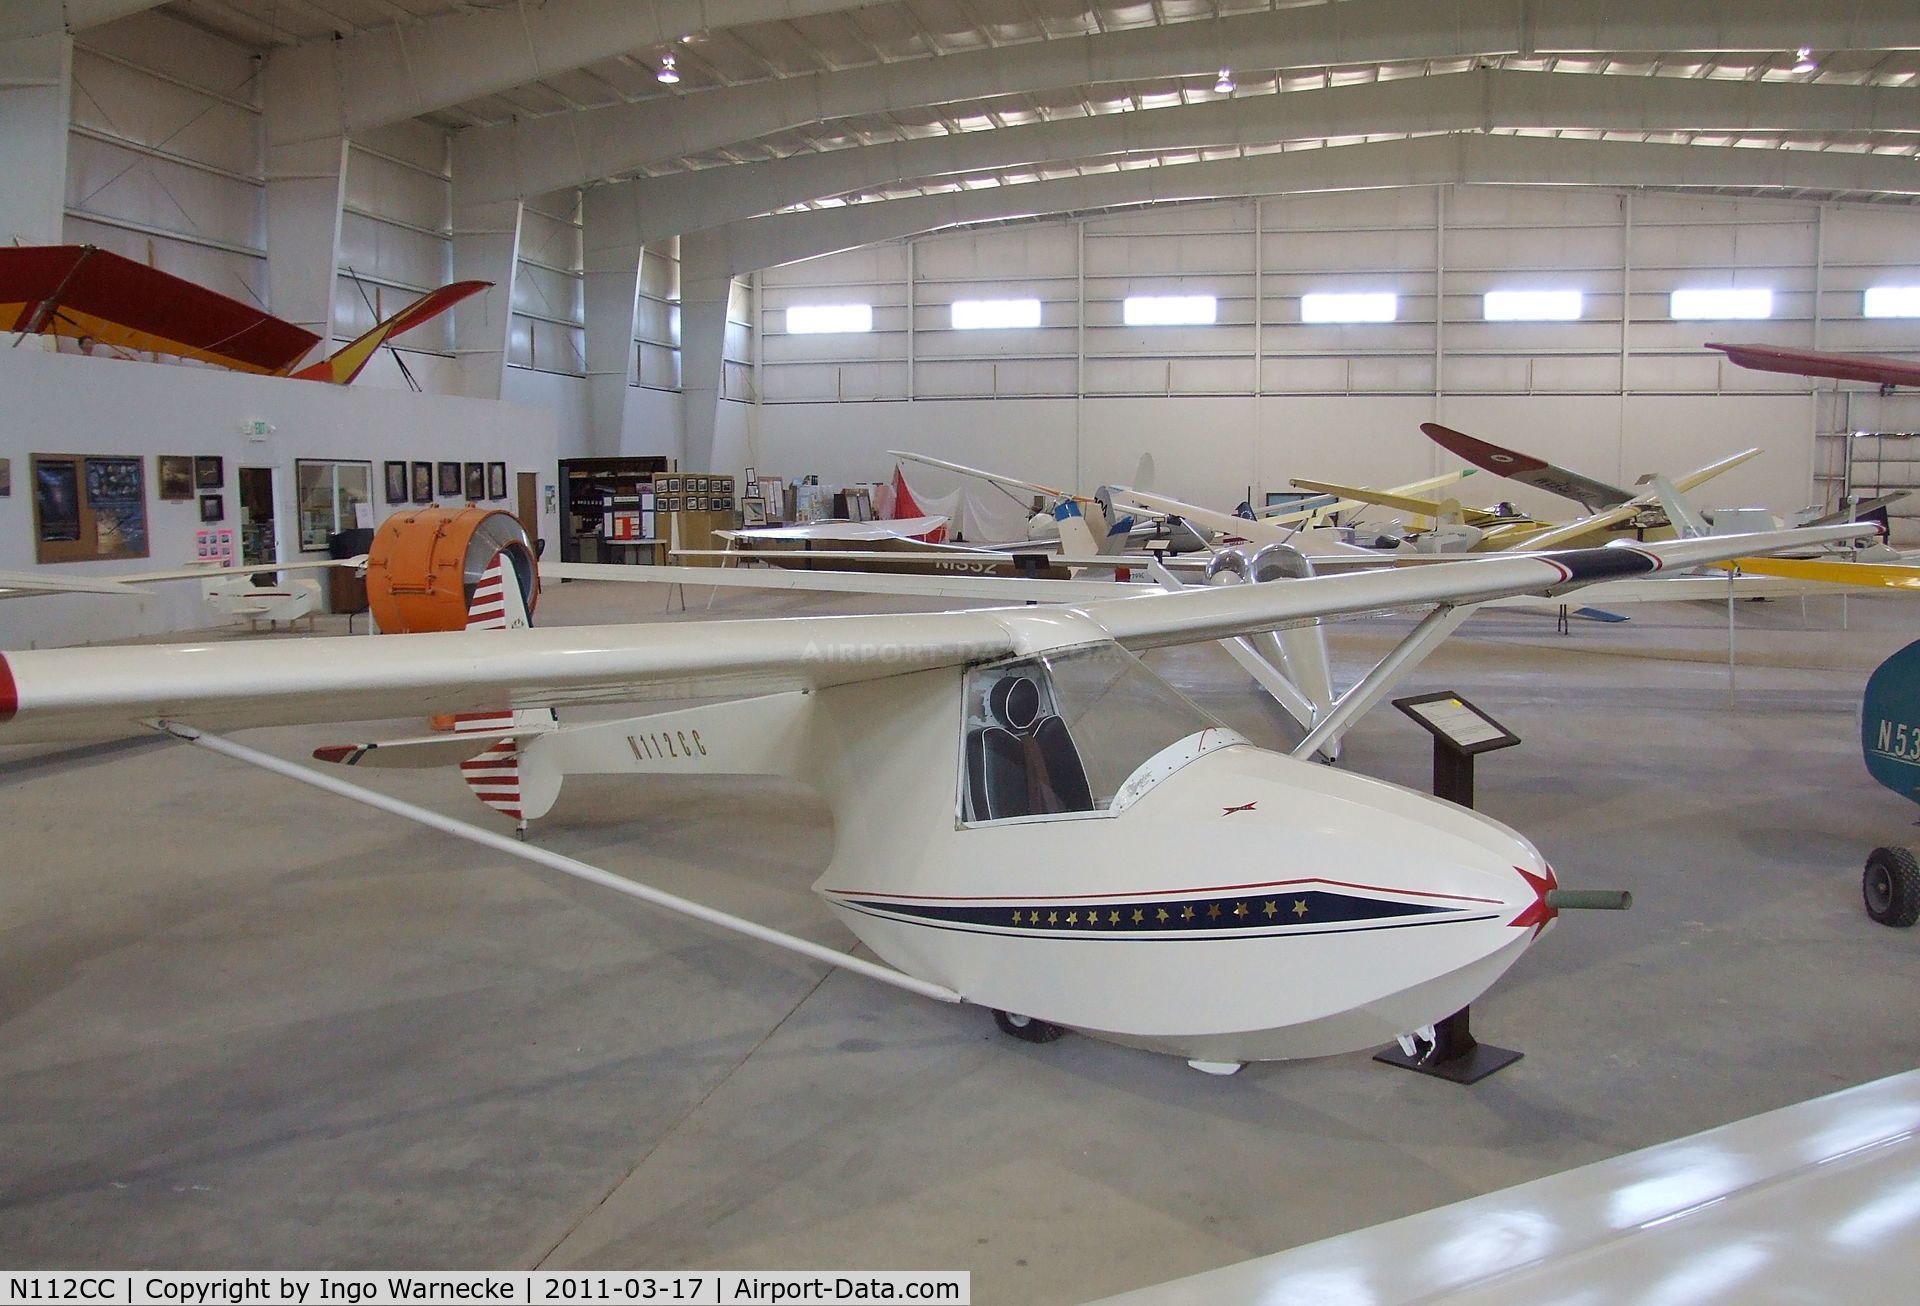 N112CC, 1976 Campbell CSG-1 C/N 112, Campbell / Scanlon CSG-1A at the Southwest Soaring Museum, Moriarty NM